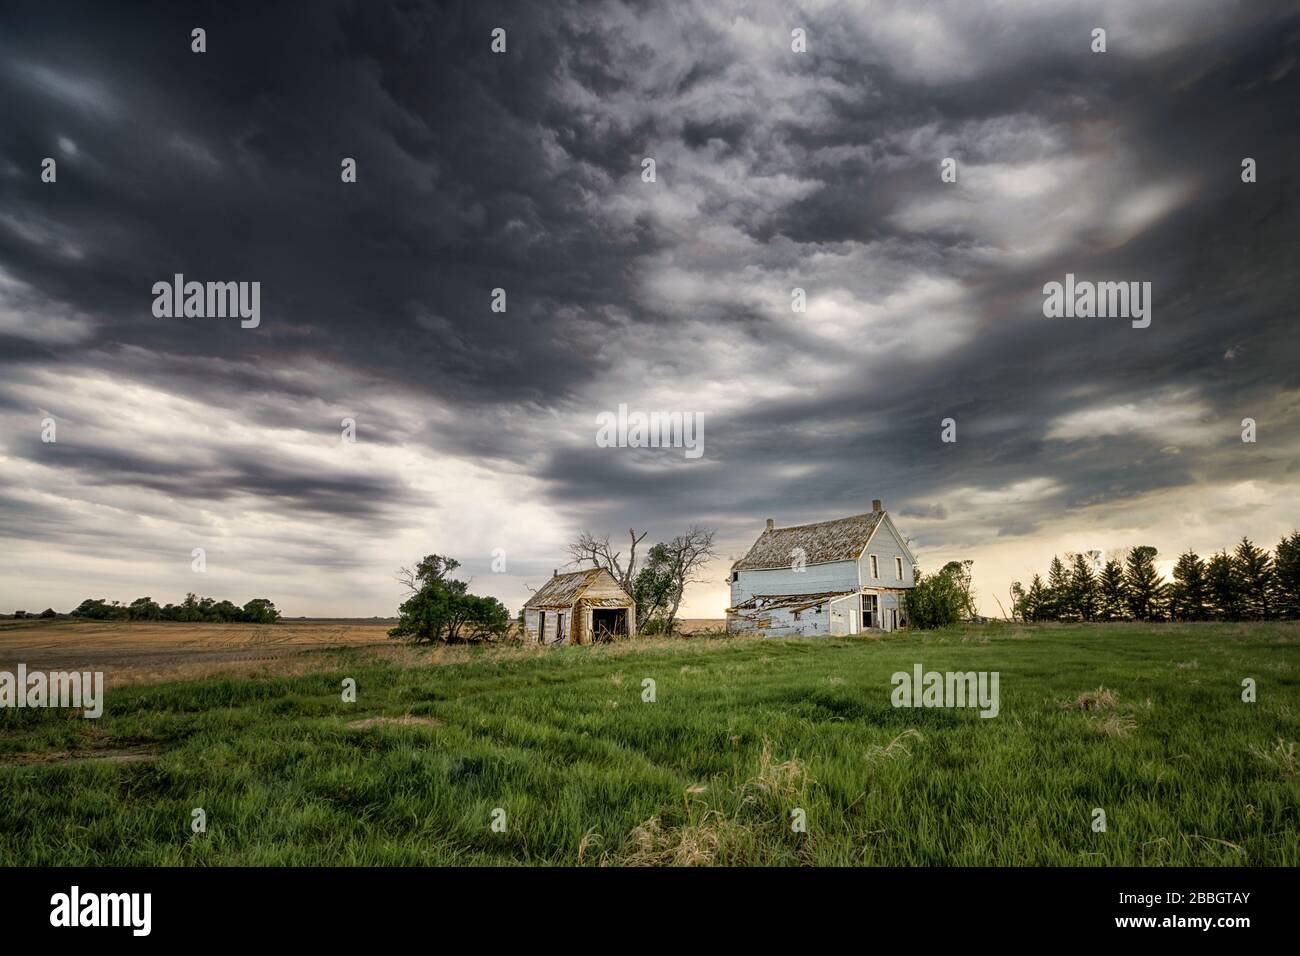 Storm over old abandoned house in southern Manitoba, Canada Stock Photo